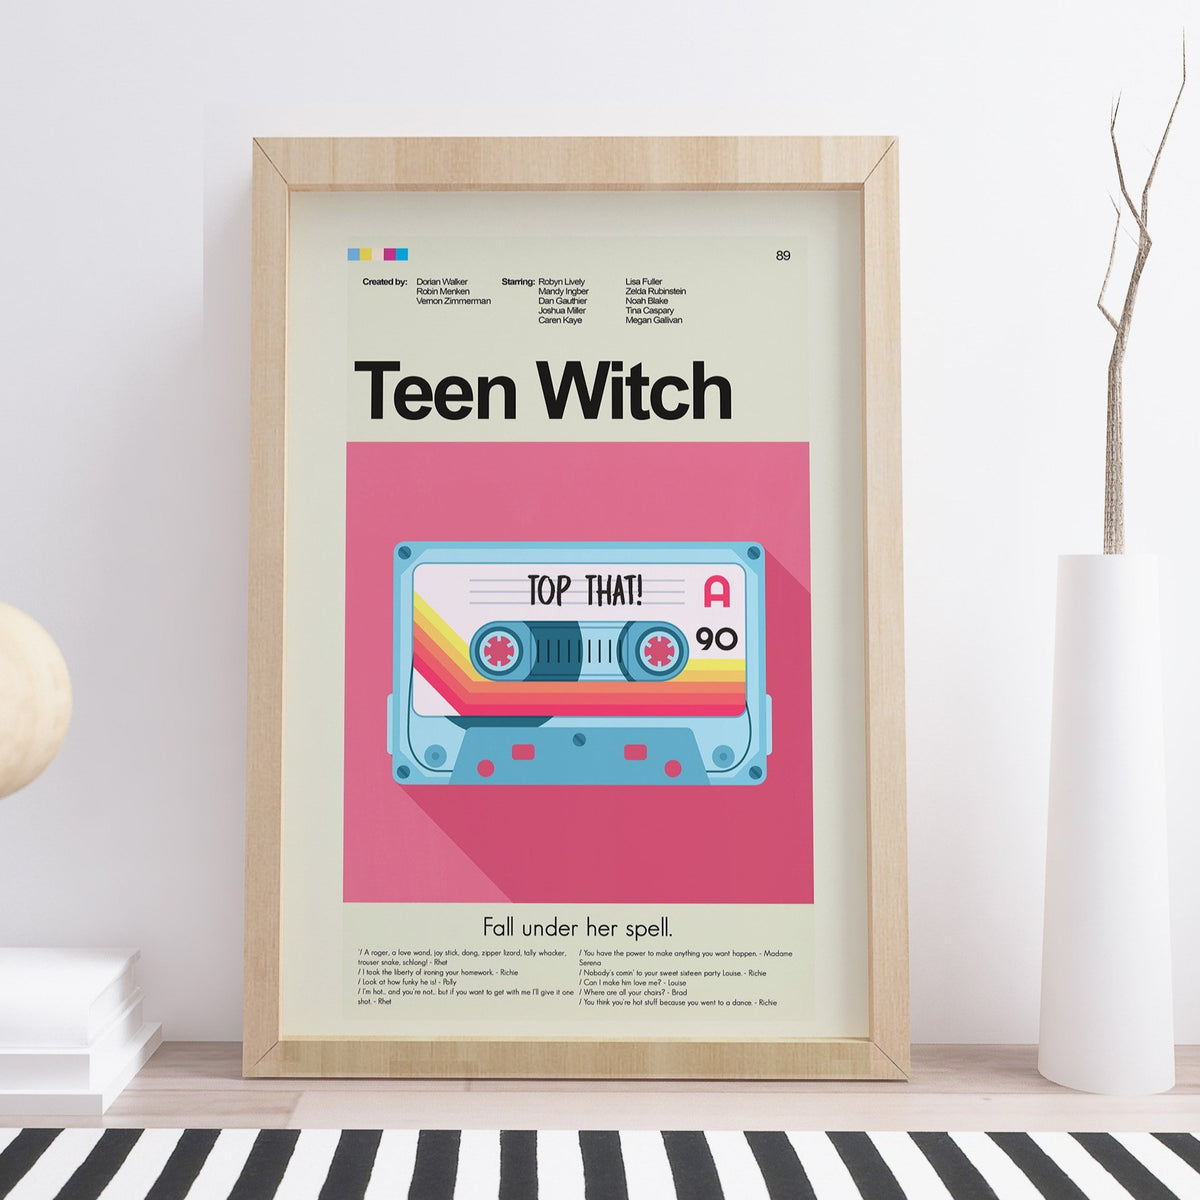 Teen Witch - Cassette Tape | 12"x18" or 18"x24" Print only